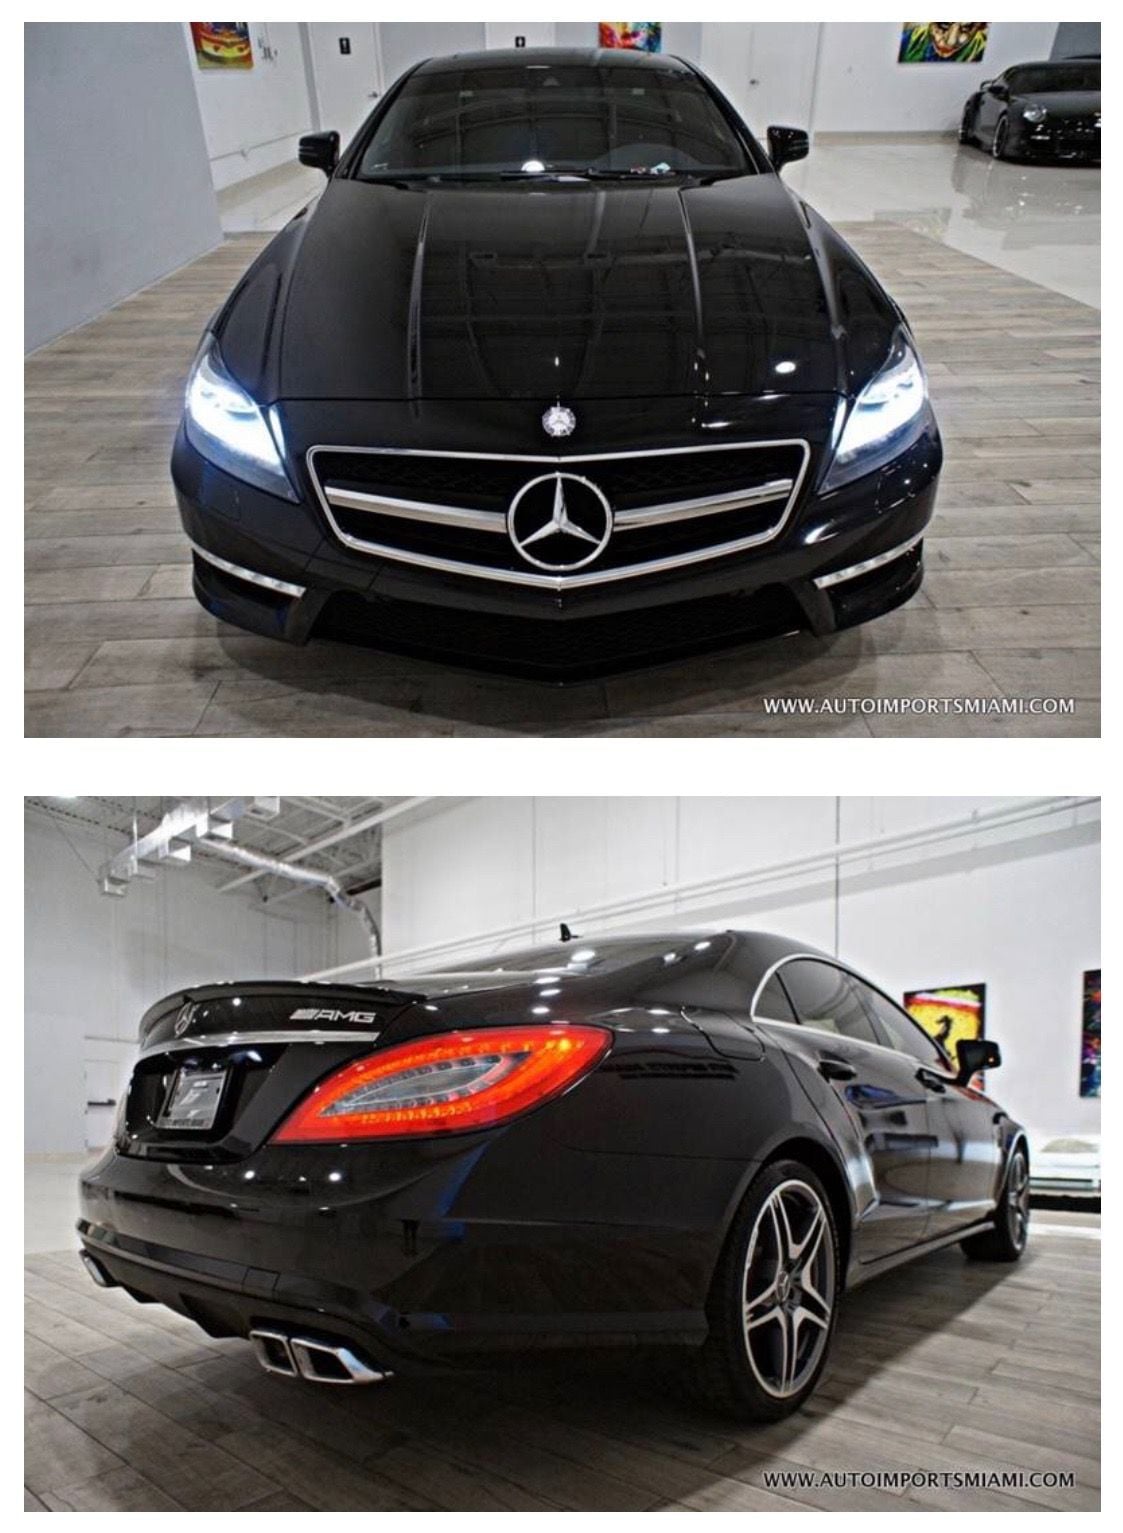 2013 Mercedes-Benz CLS63 AMG - Near perfect 2013 CLS63 AMG w/excellent Service records from Mercedes - Used - VIN WDDLJ7EB2DA079755 - 63,000 Miles - 8 cyl - 2WD - Automatic - Coupe - Black - Nashville, TN 37214, United States